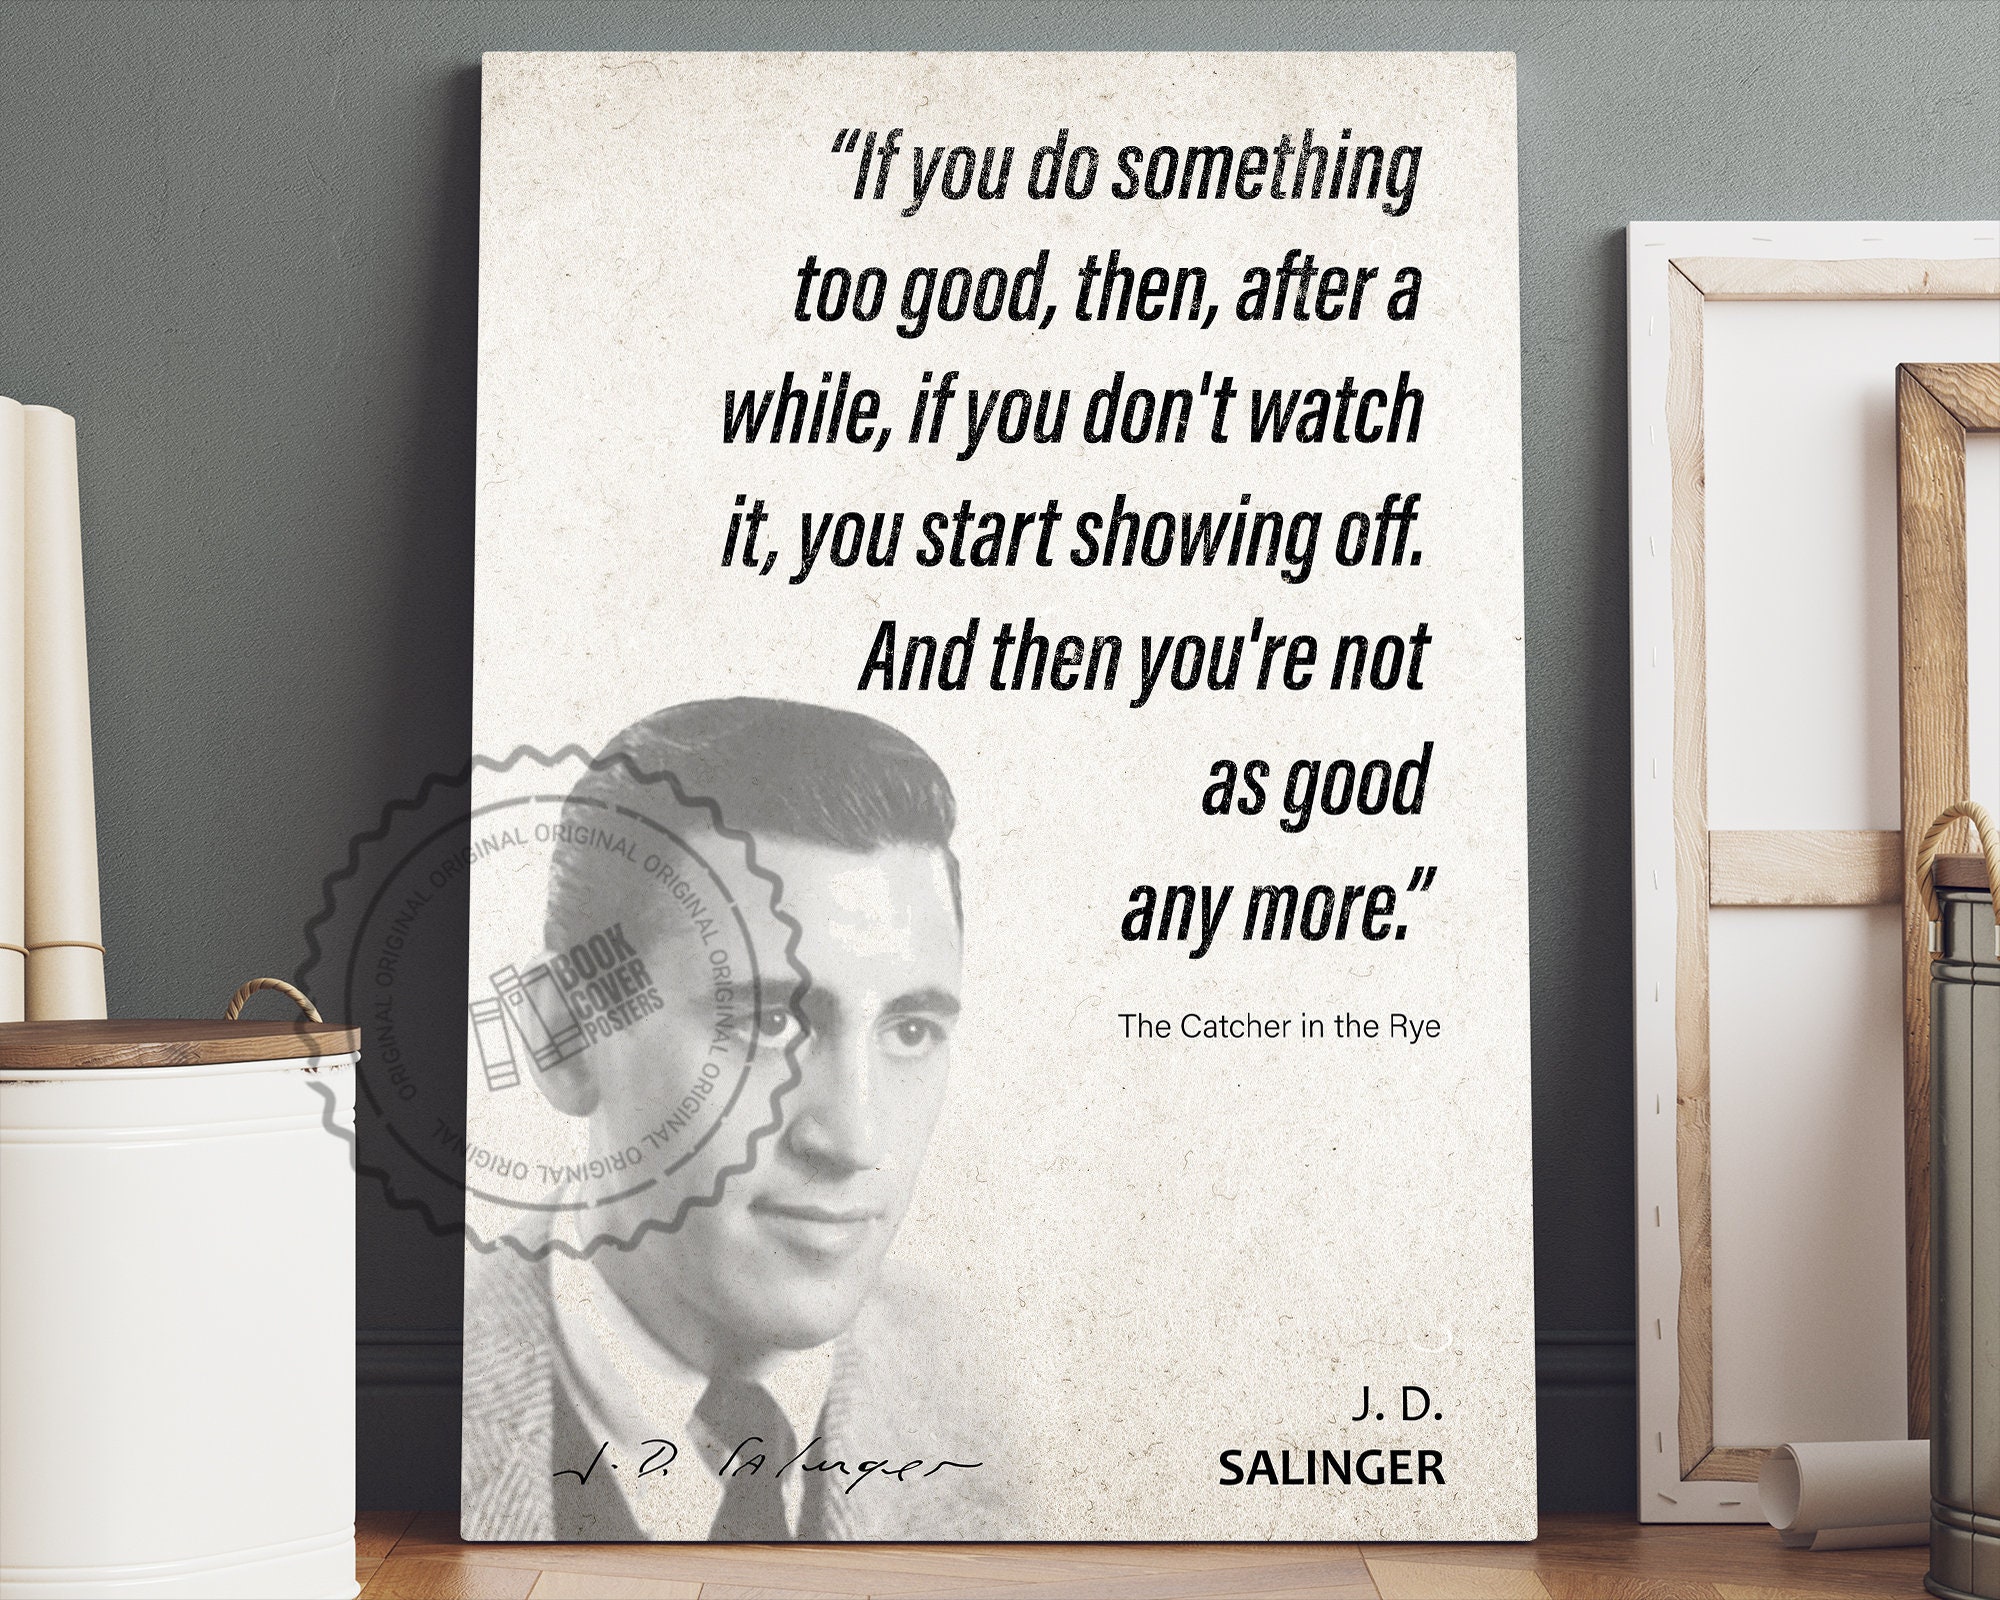 SALINGER : L'attrape-coeurs [The Catcher in the Rye] - First edition 